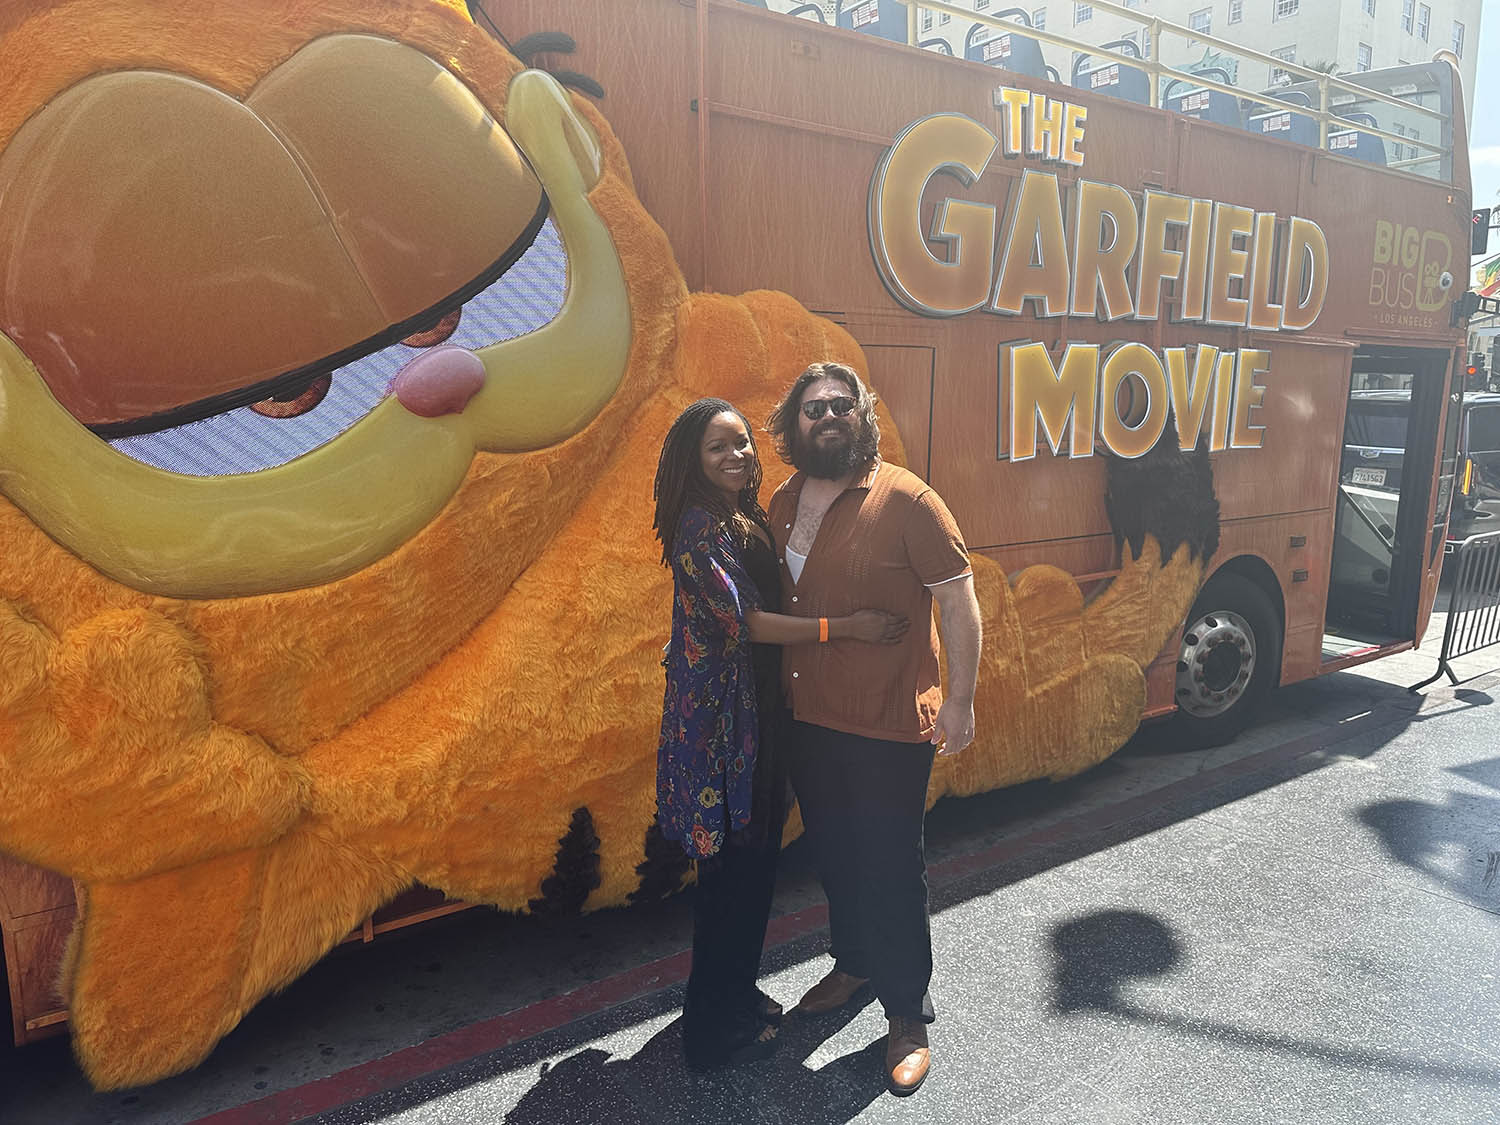 a man and woman pose in front of a Garfield-branded tour bus